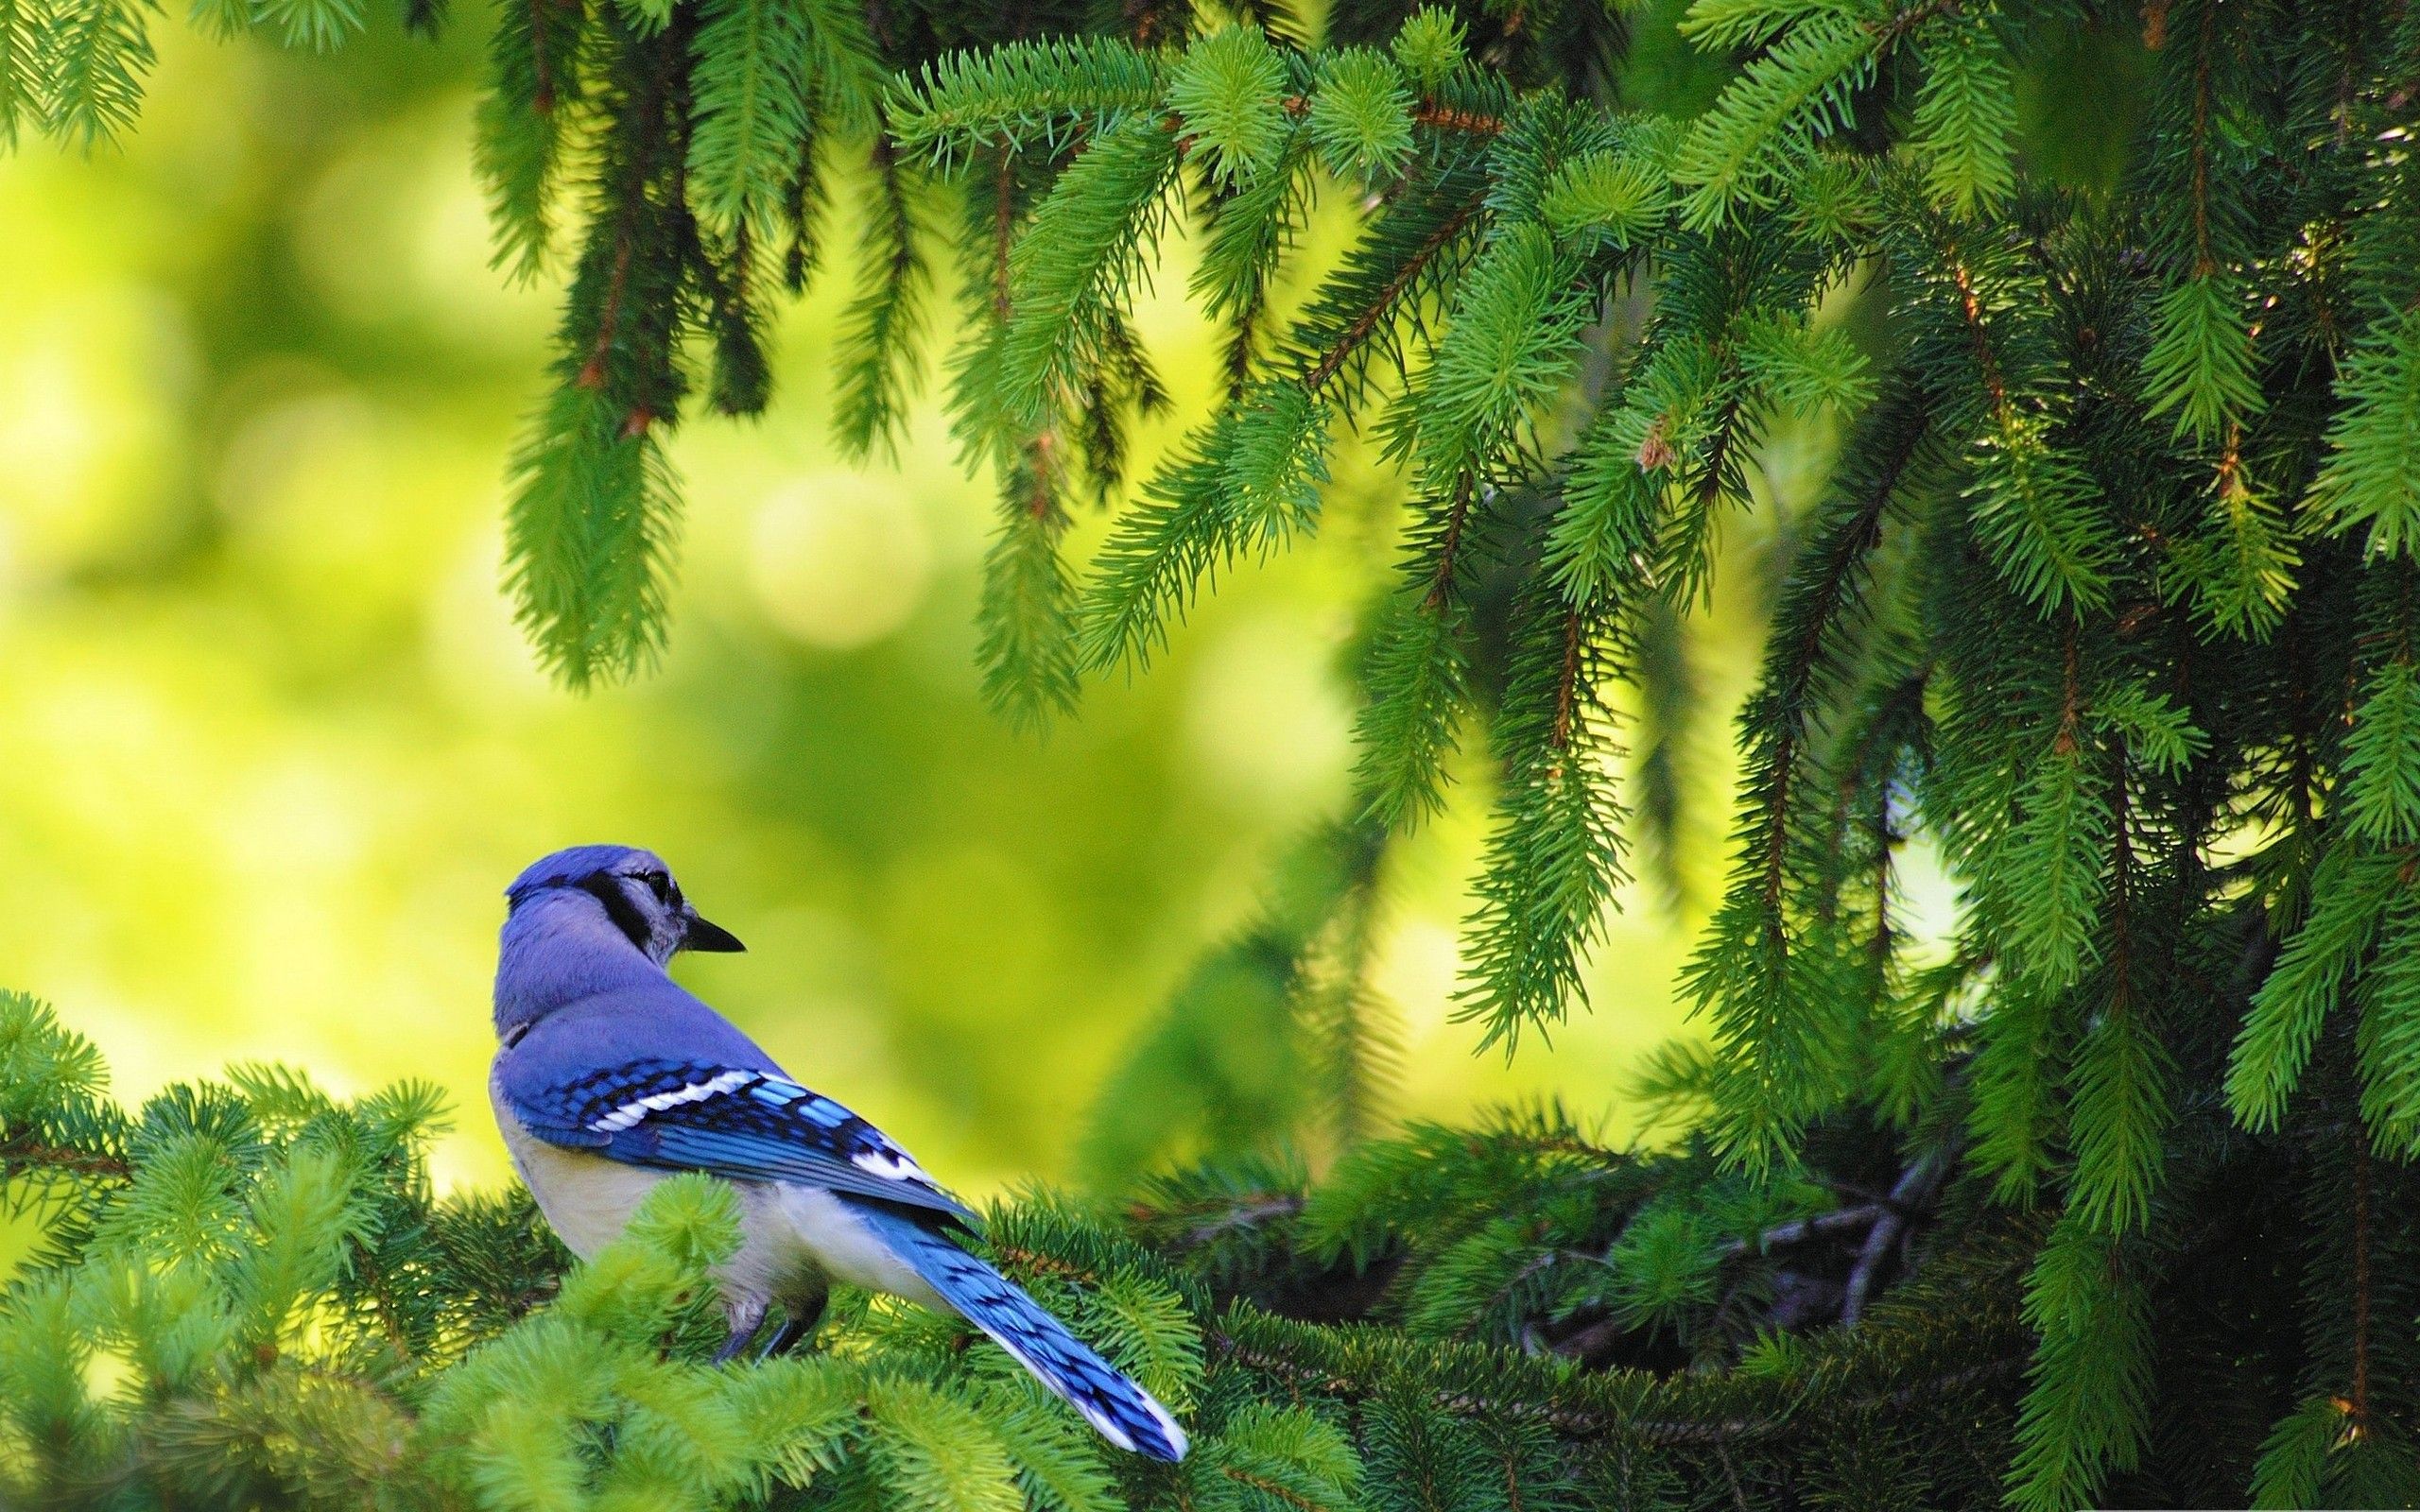 Nature Images With Birds And Animals - 2560x1600 Wallpaper 